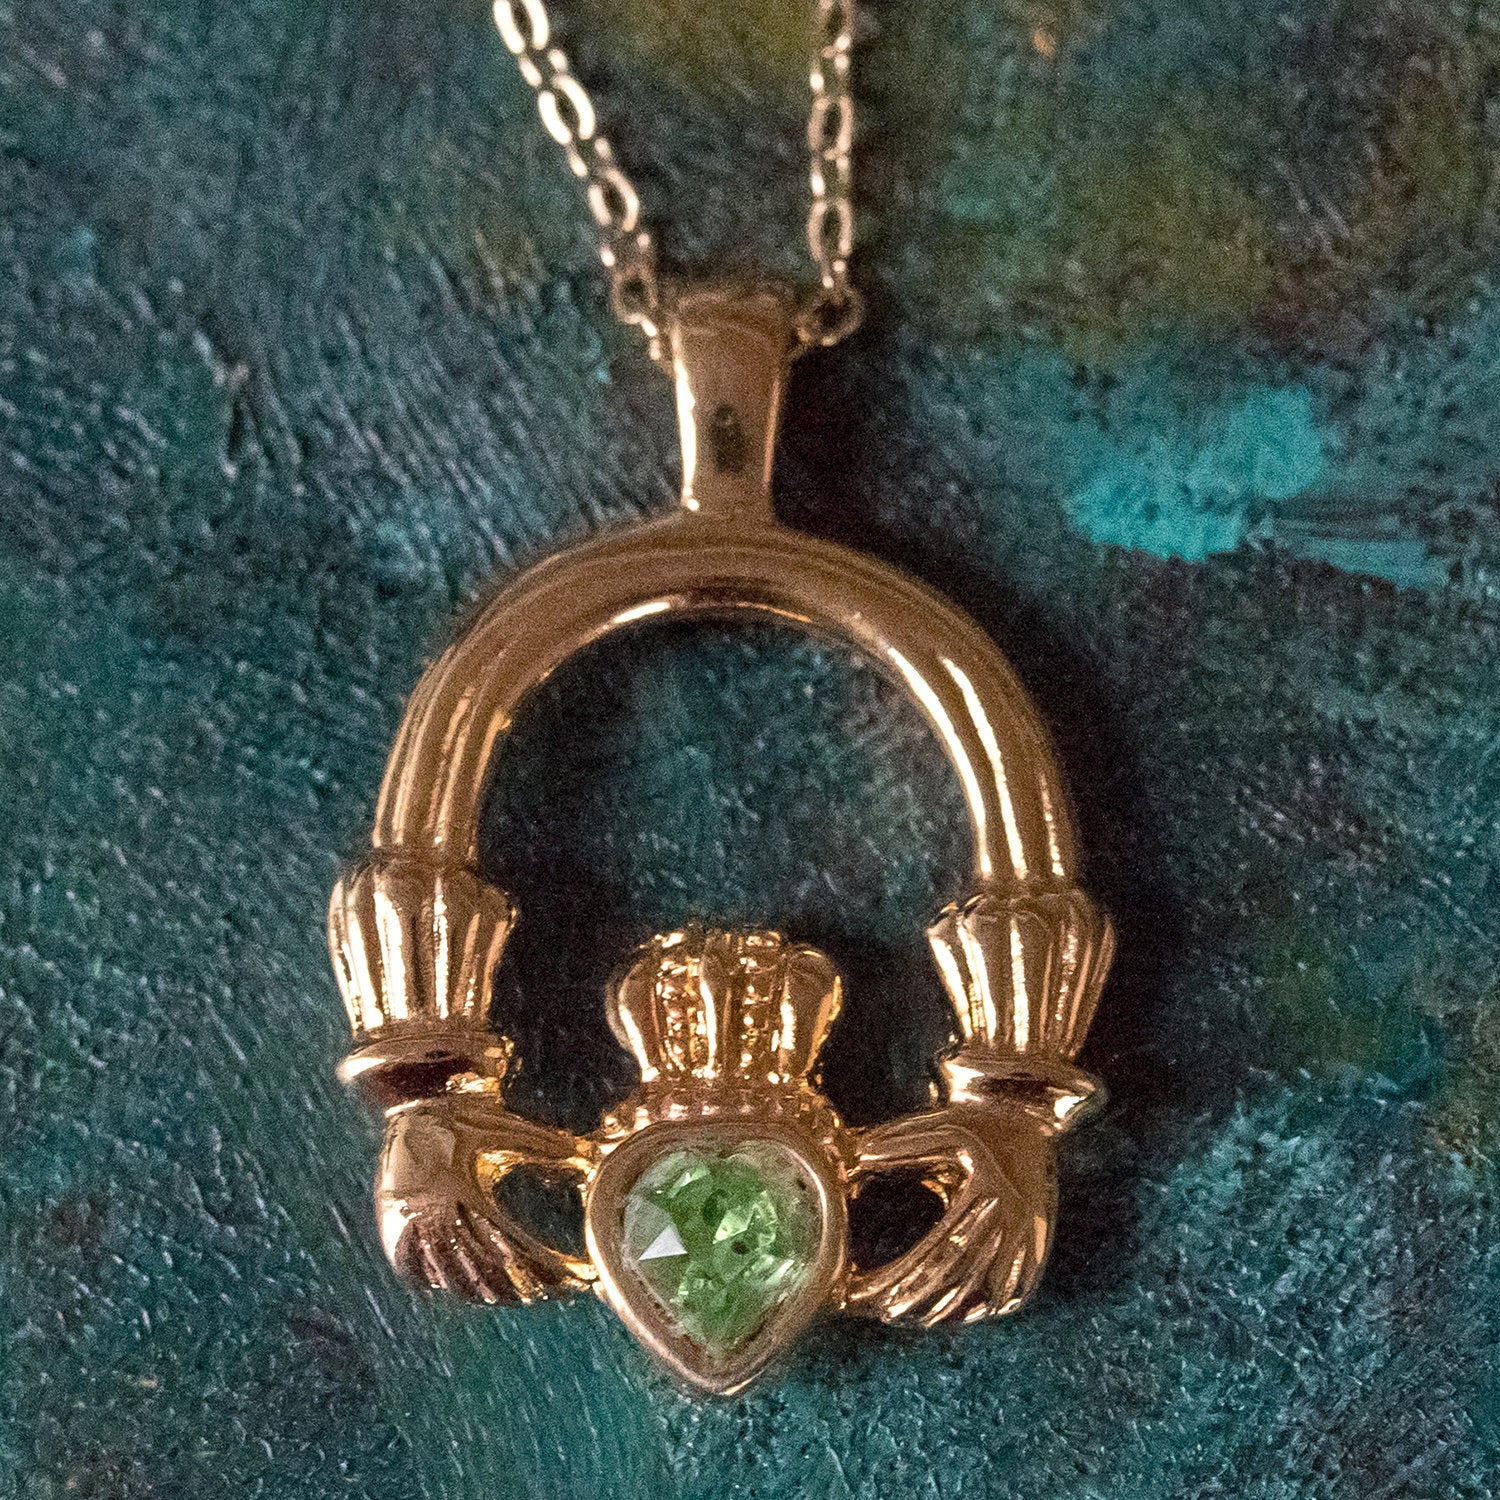 Vintage Claddagh Necklace Peridot Austrian Heart Crystal 18k Yellow Gold Electroplated Made in the USA